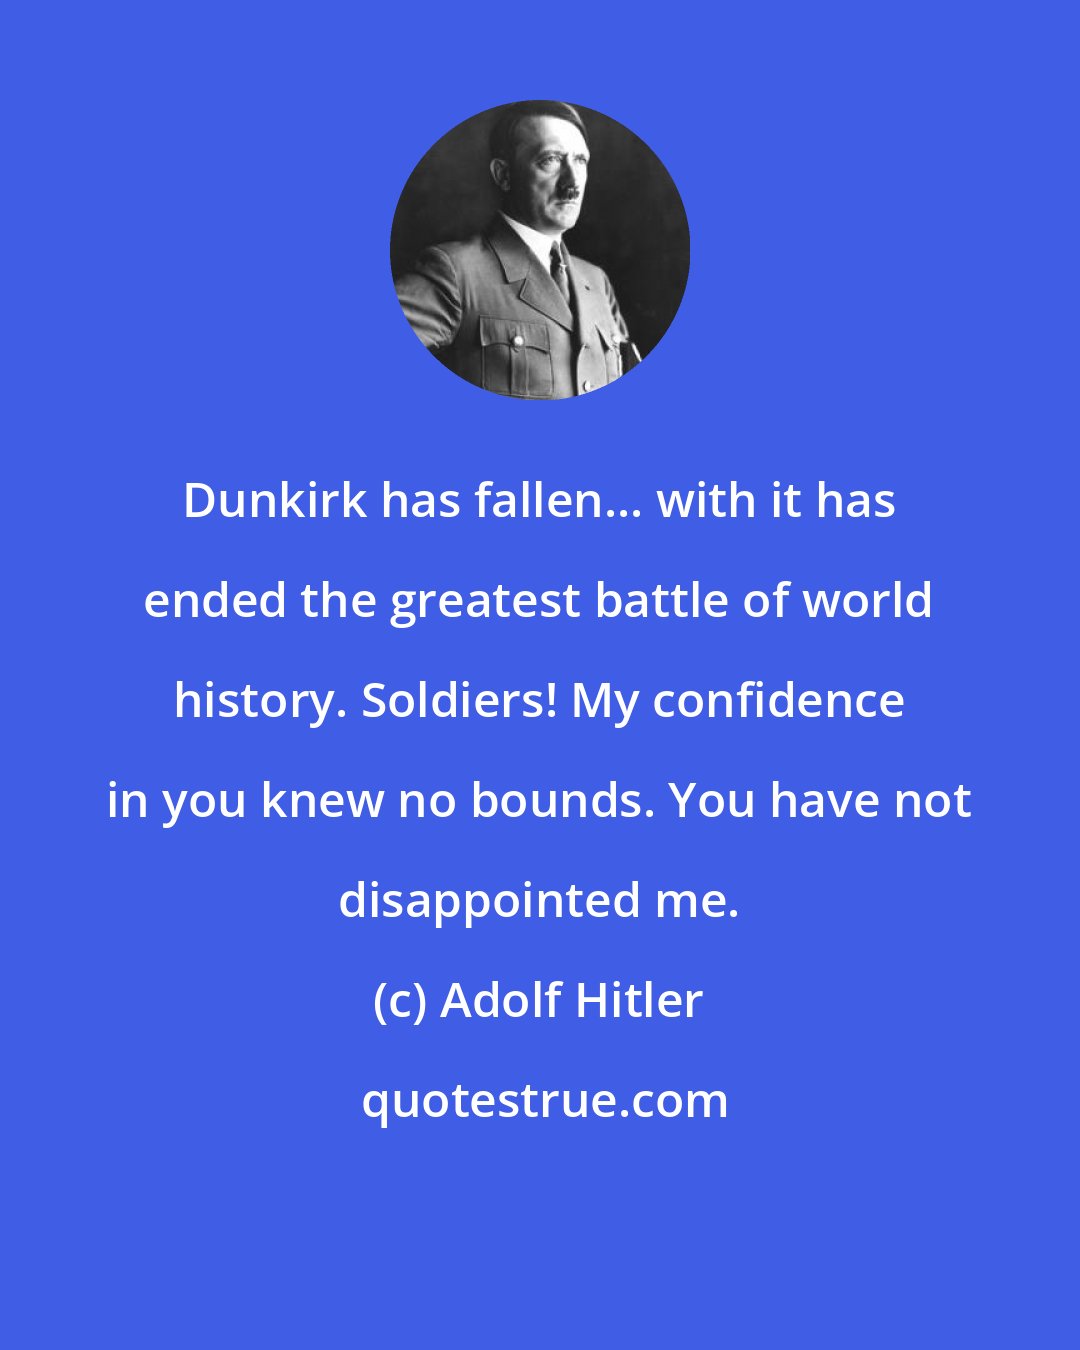 Adolf Hitler: Dunkirk has fallen... with it has ended the greatest battle of world history. Soldiers! My confidence in you knew no bounds. You have not disappointed me.